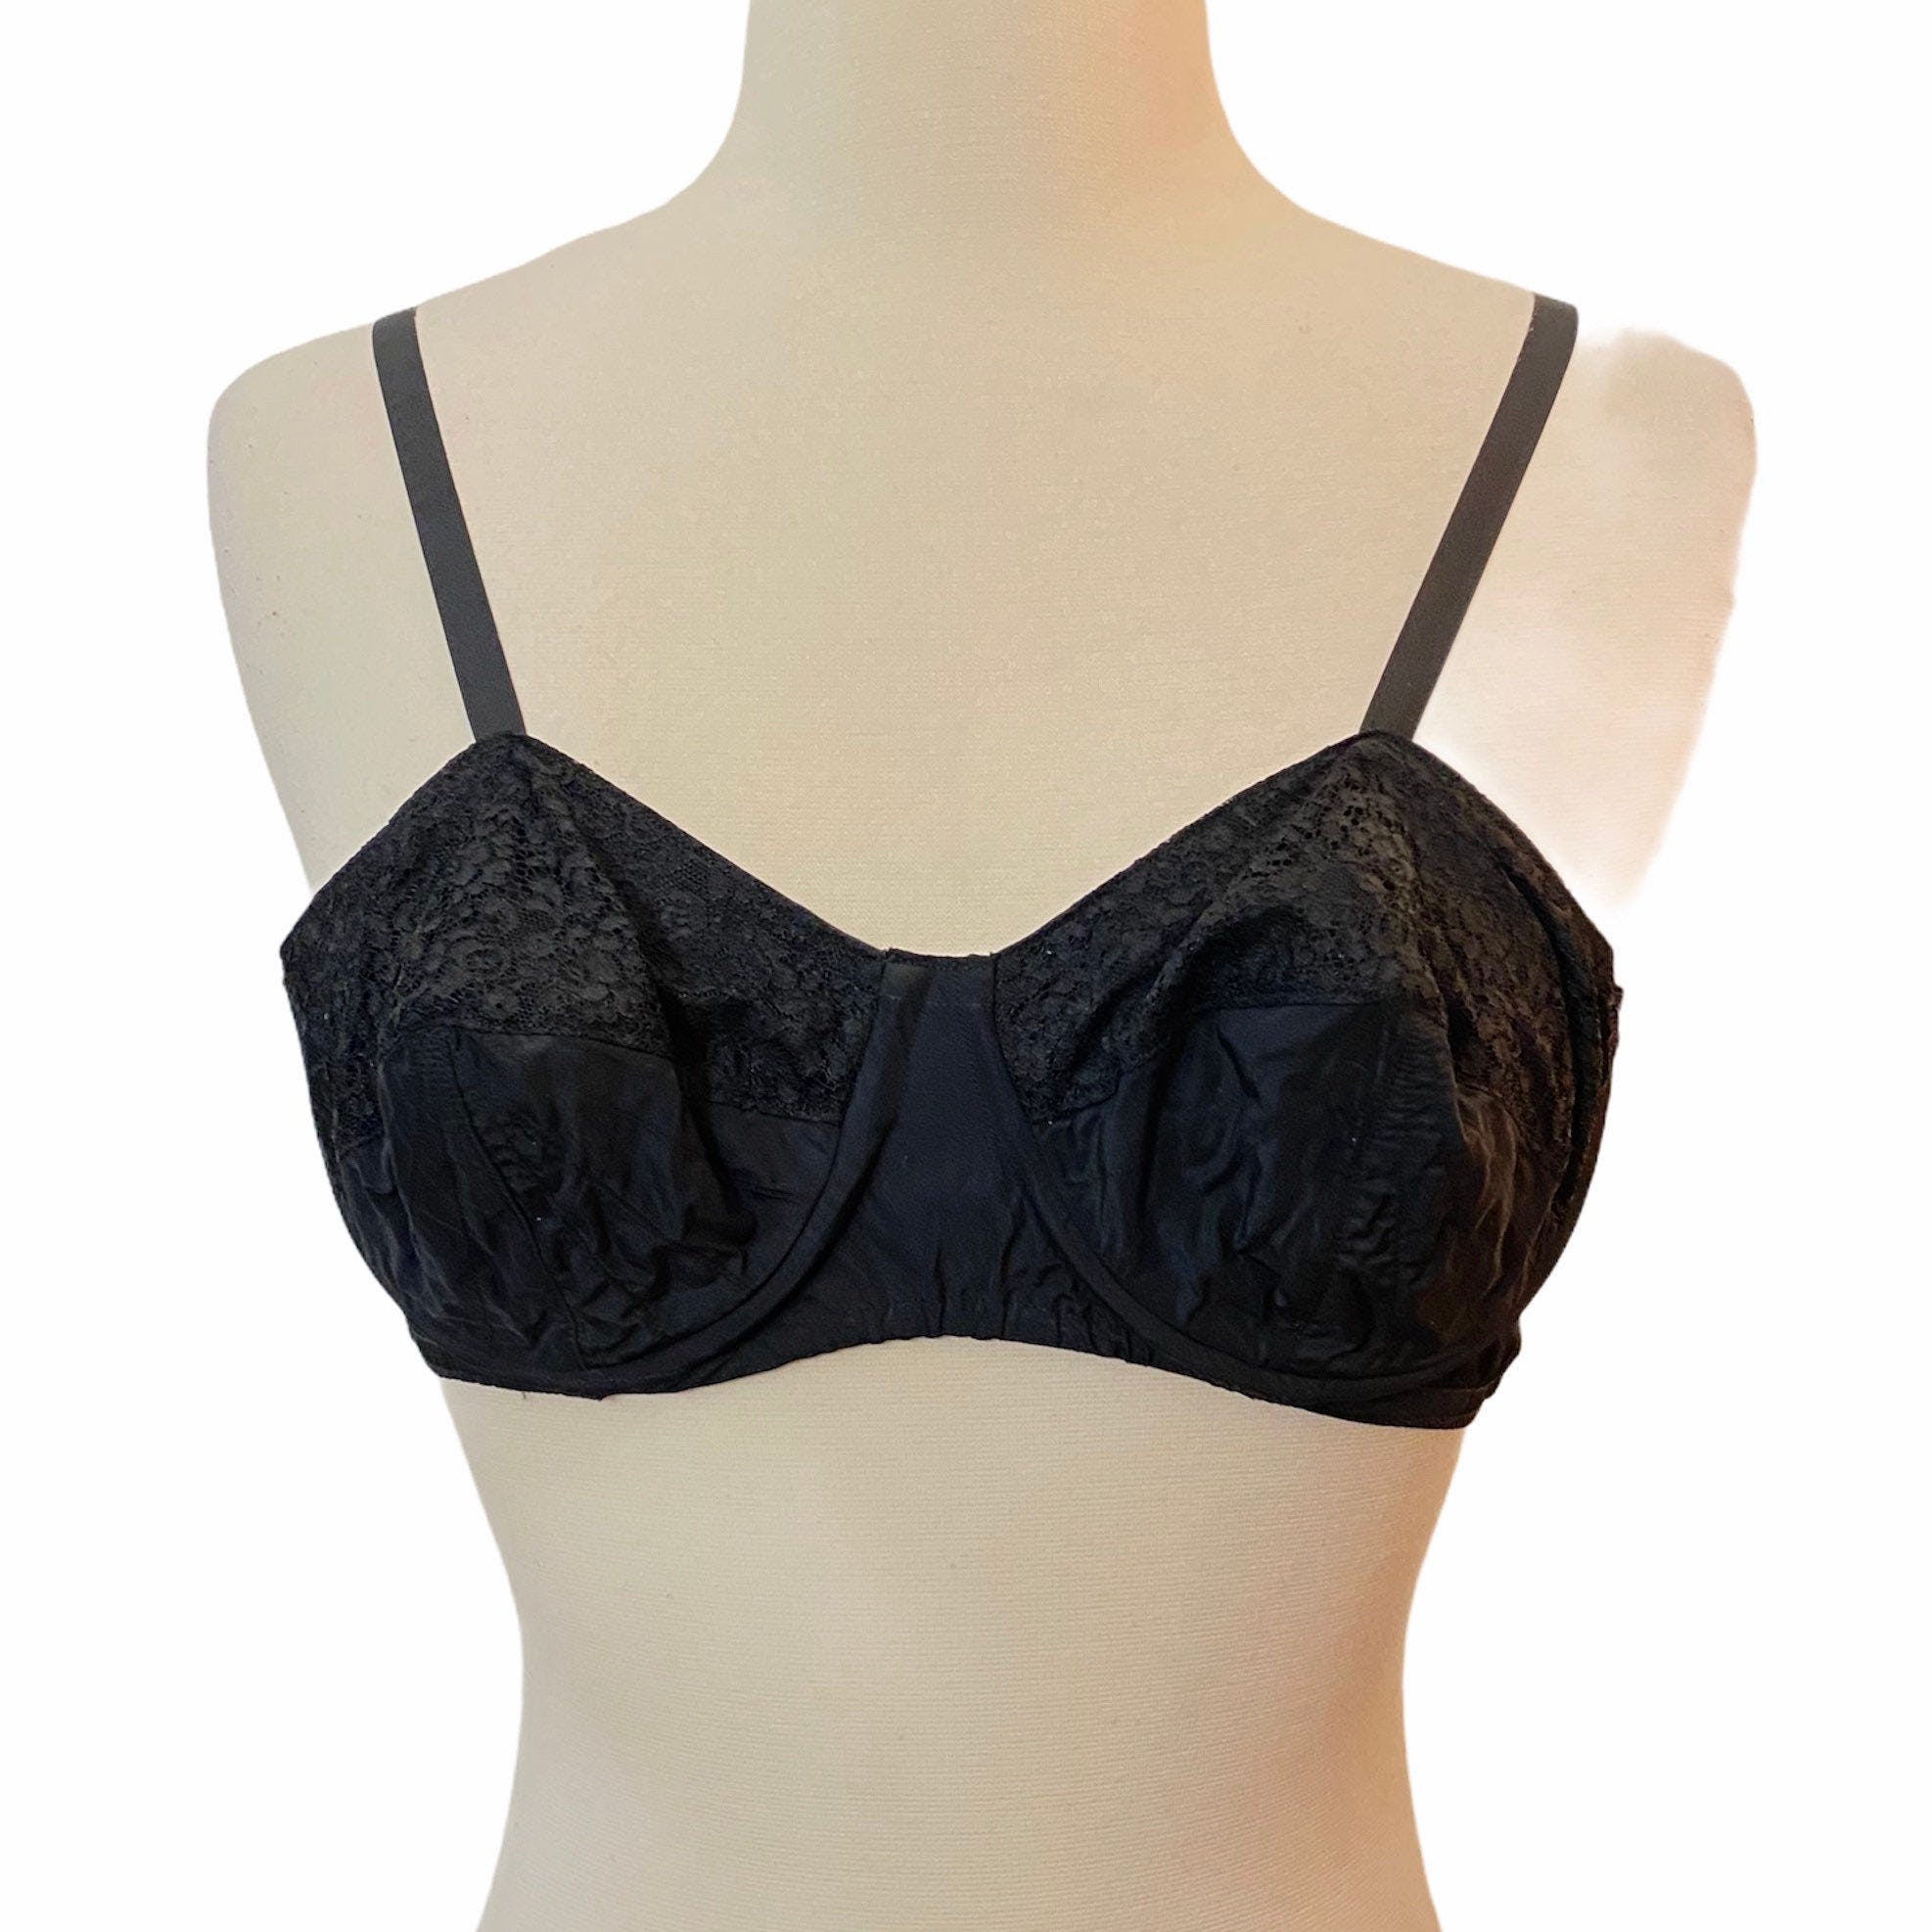 Vintage 50's French Black Lace Bullet Bra by Gaine Rumeur